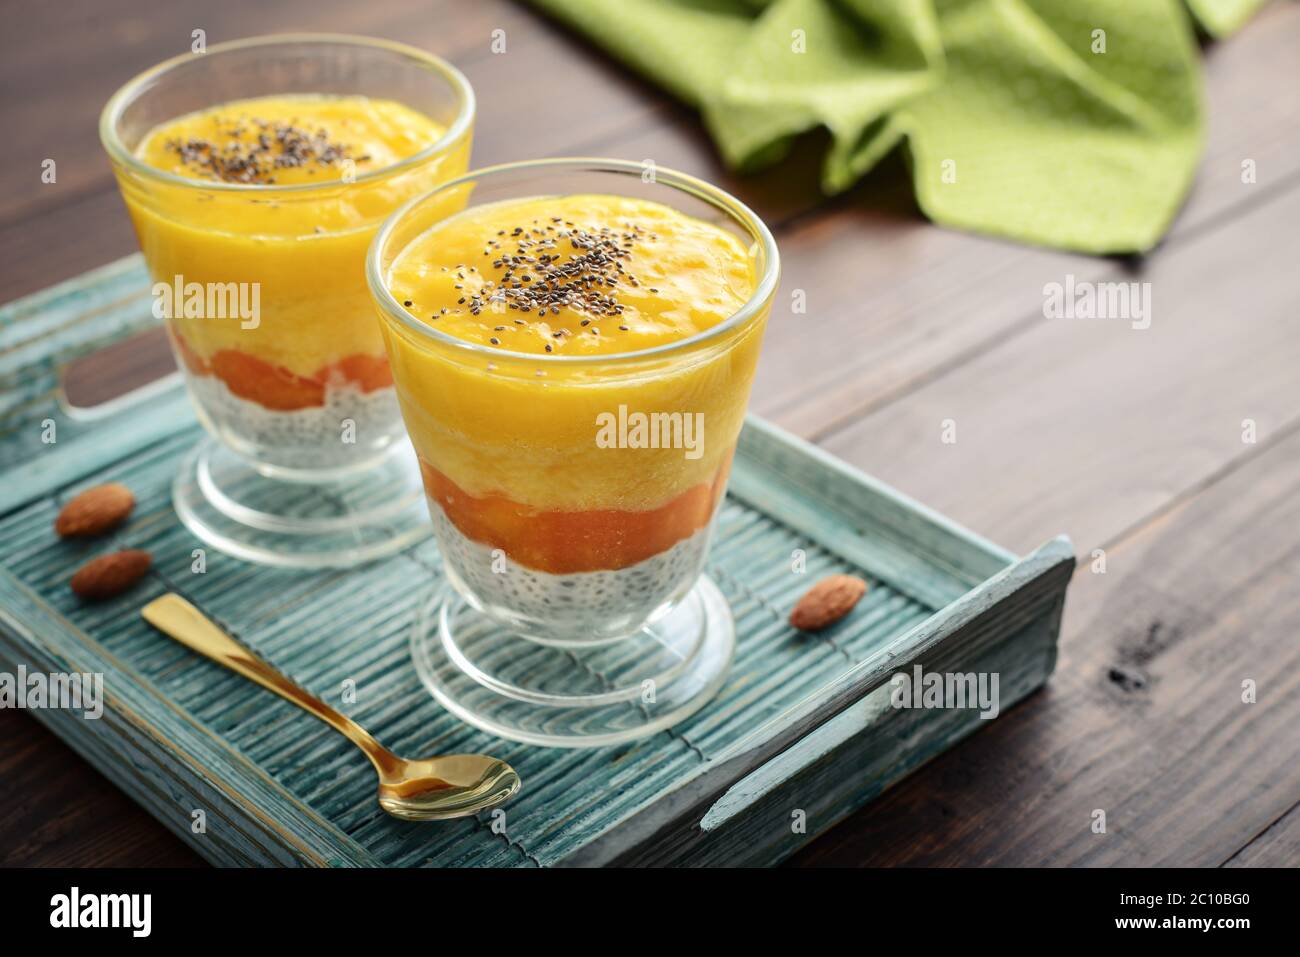 Homemade chia seed pudding with mango and almond in glass on wooden background Stock Photo